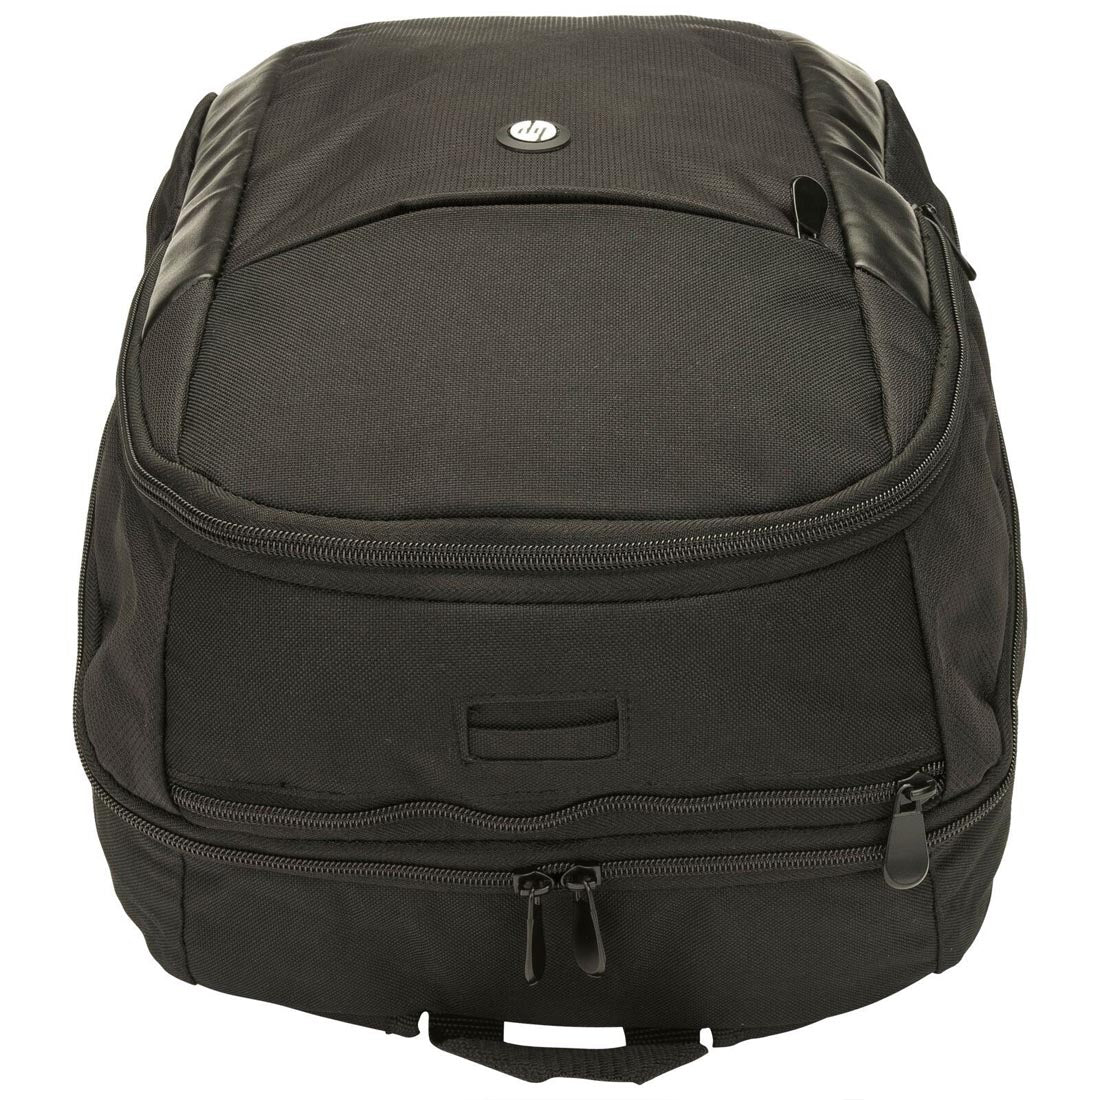 HP H1D24AA Essential 15.6-Inch Laptop Backpack with Earphone Pass-Through Pocket